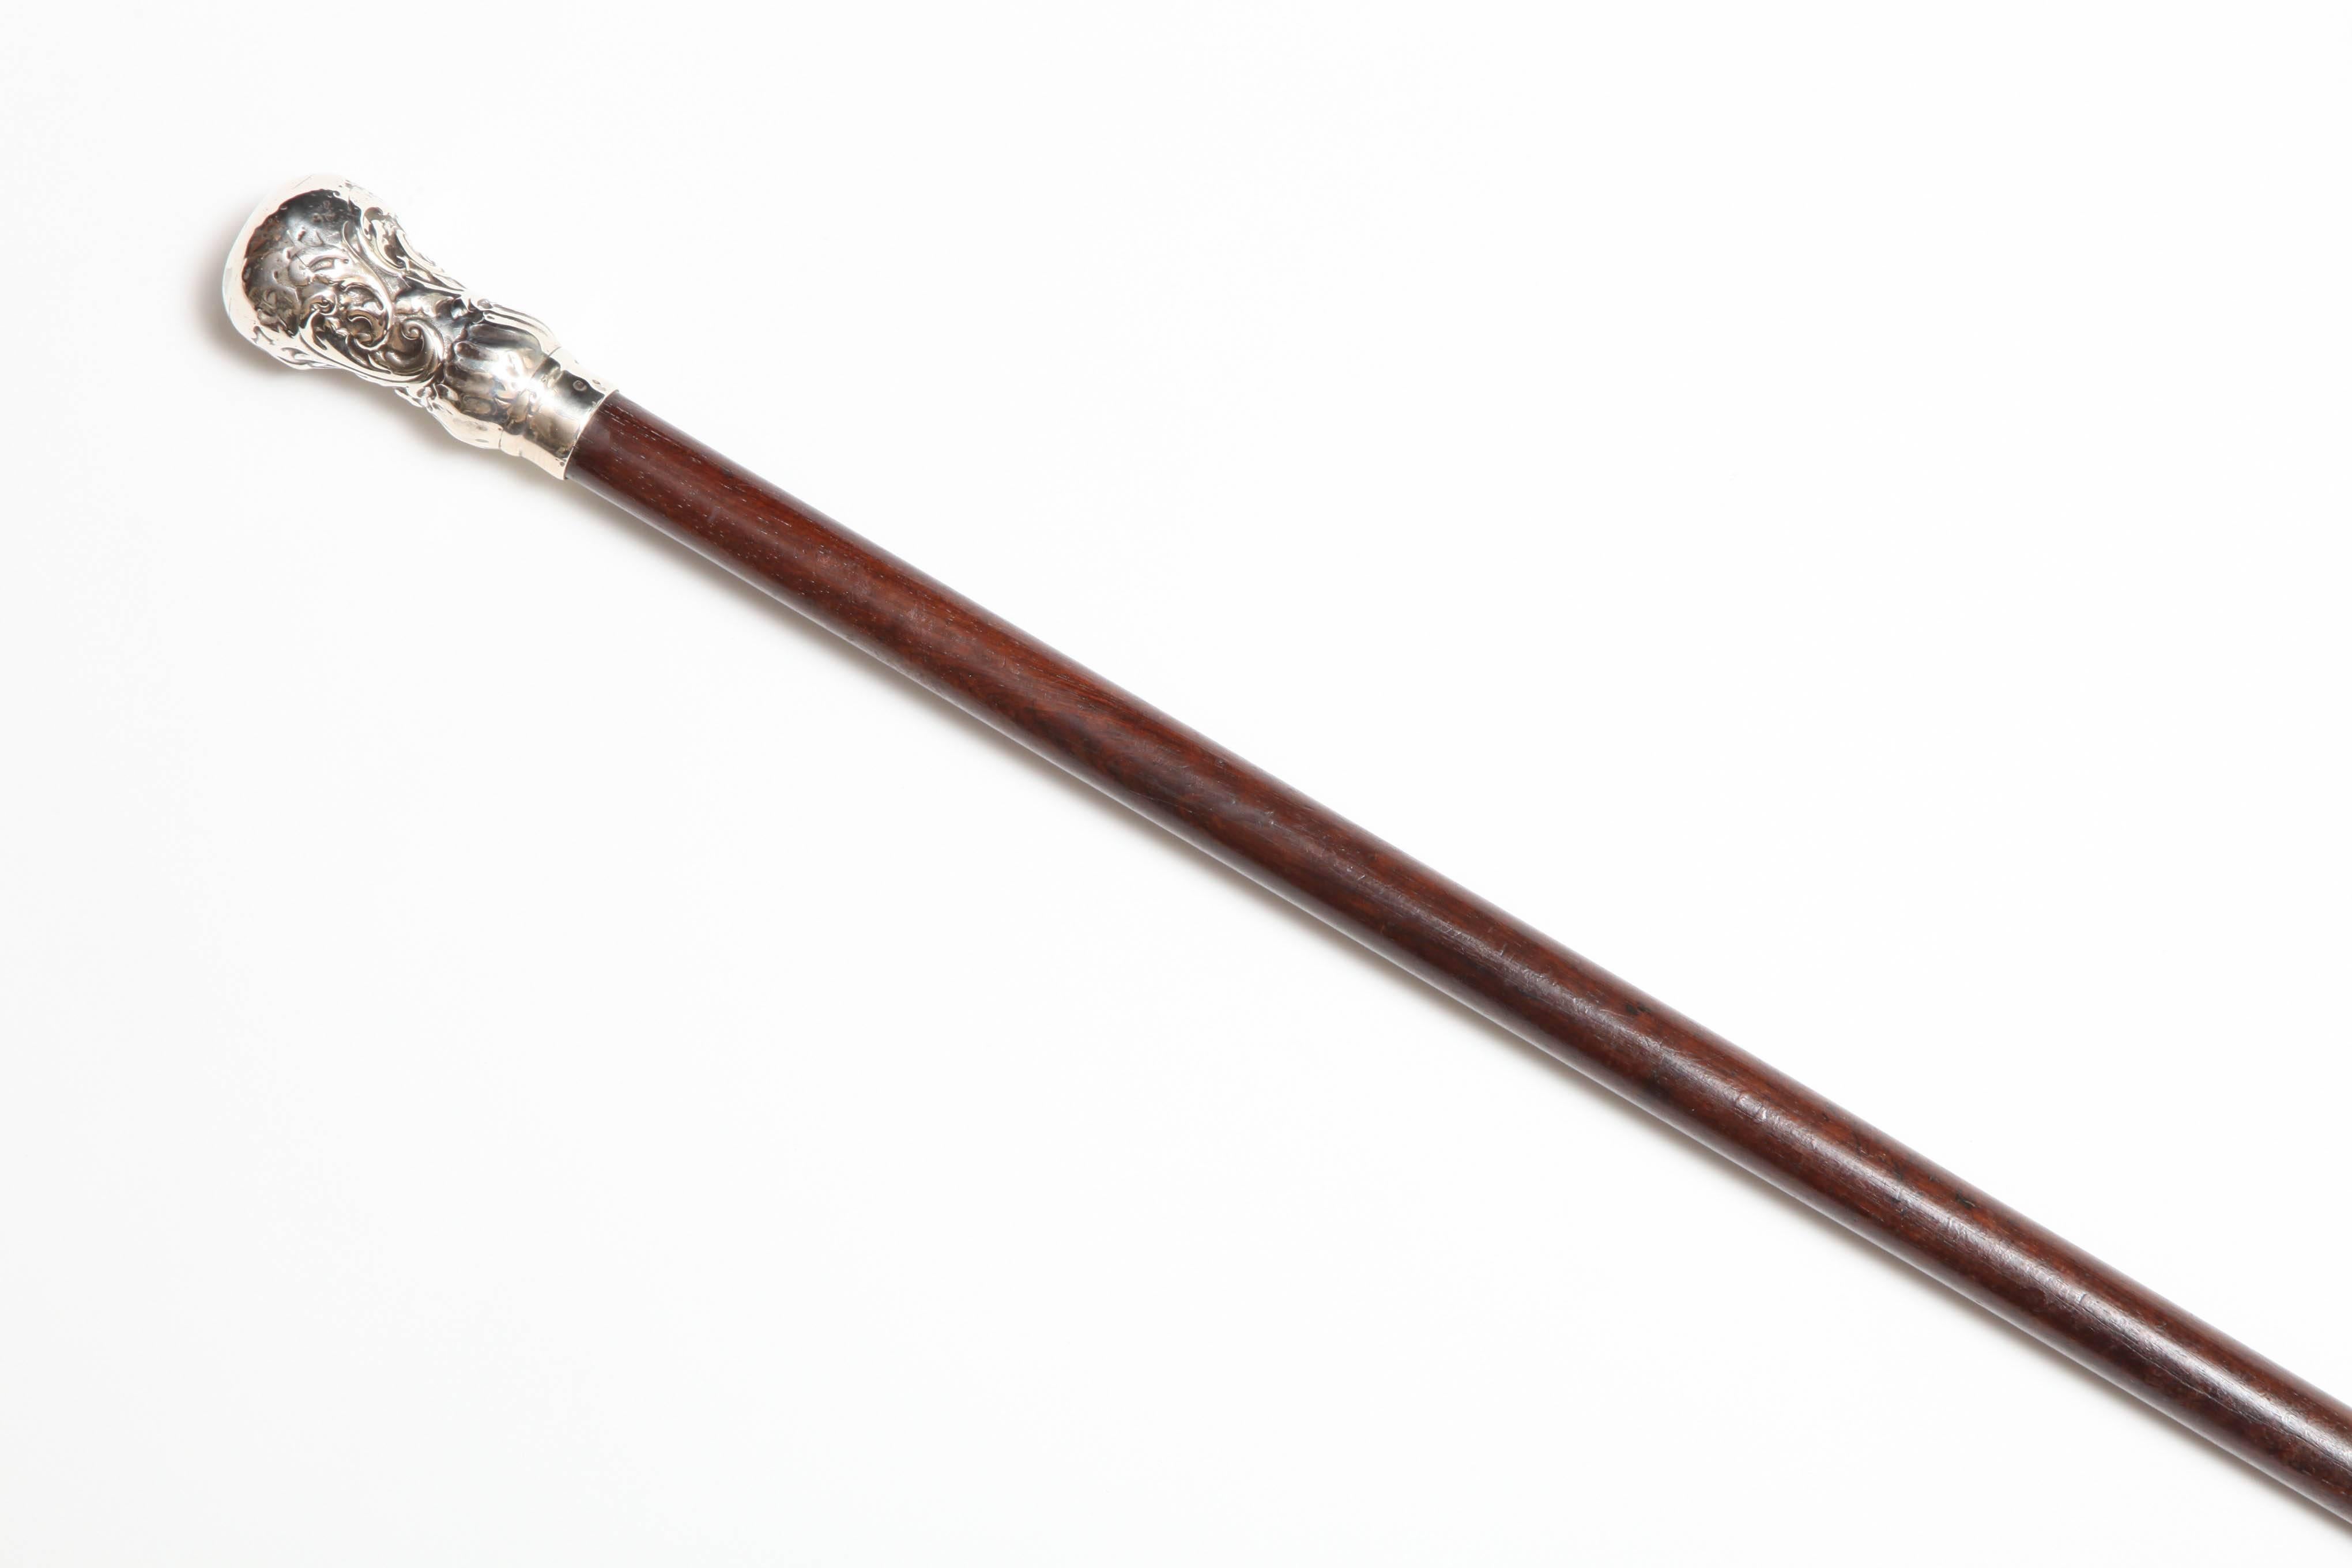 Victorian, French, sterling silver-mounted wooden cane/walking stick, Paris, circa 1890s. Lovely work on sterling silver mount; no monogram. Stands a little over 33